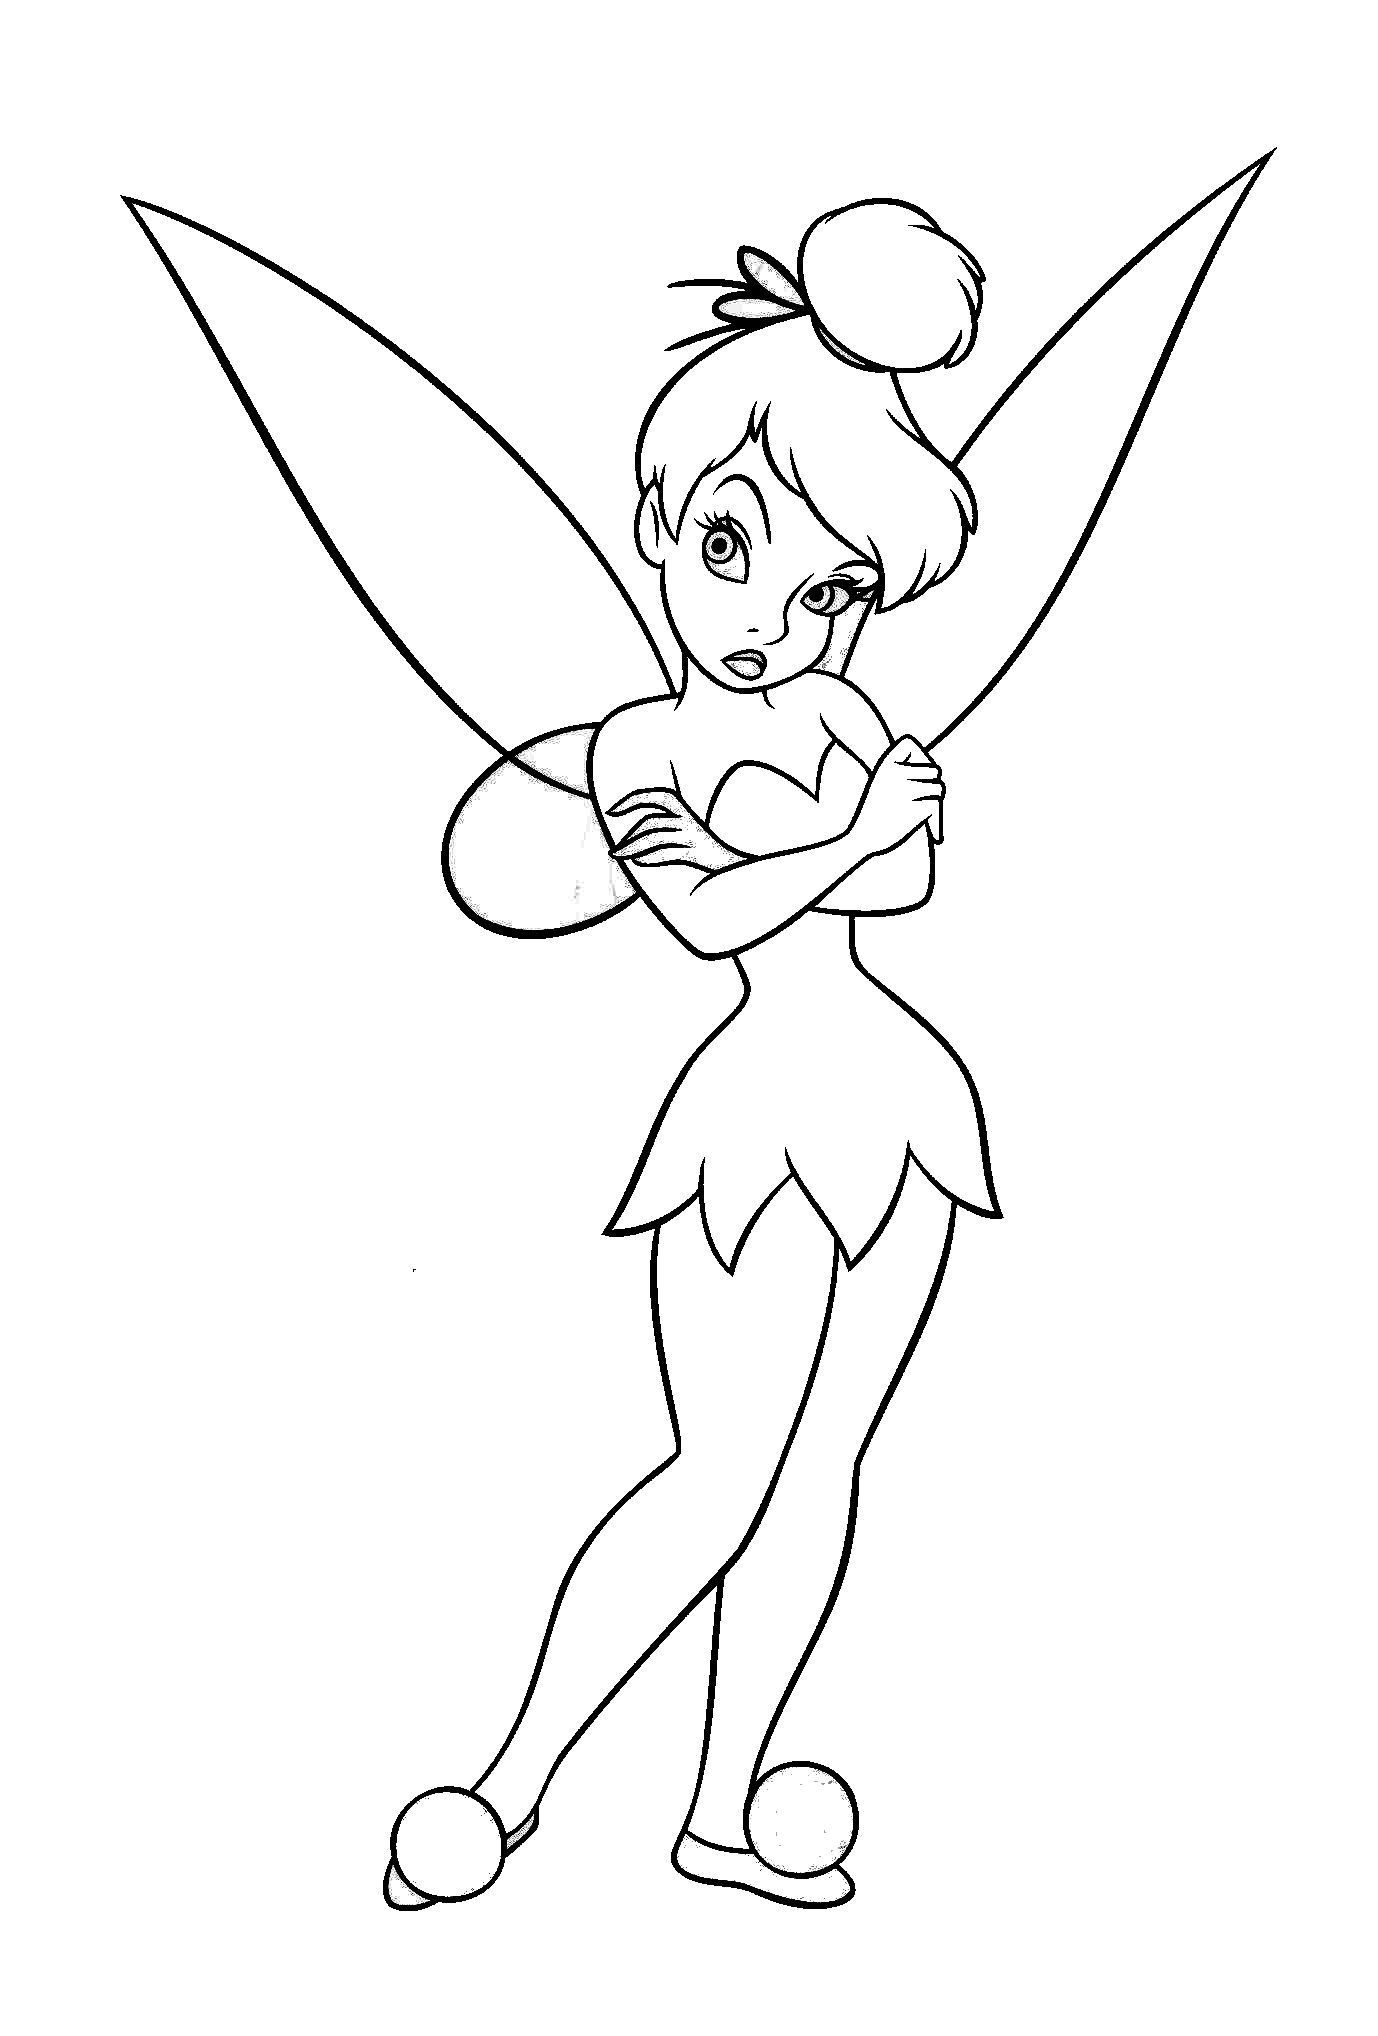 Coloring pages tinkerbell coloring pages awesome tinkerbell coloring pages with images of tinkerbell coloring pages